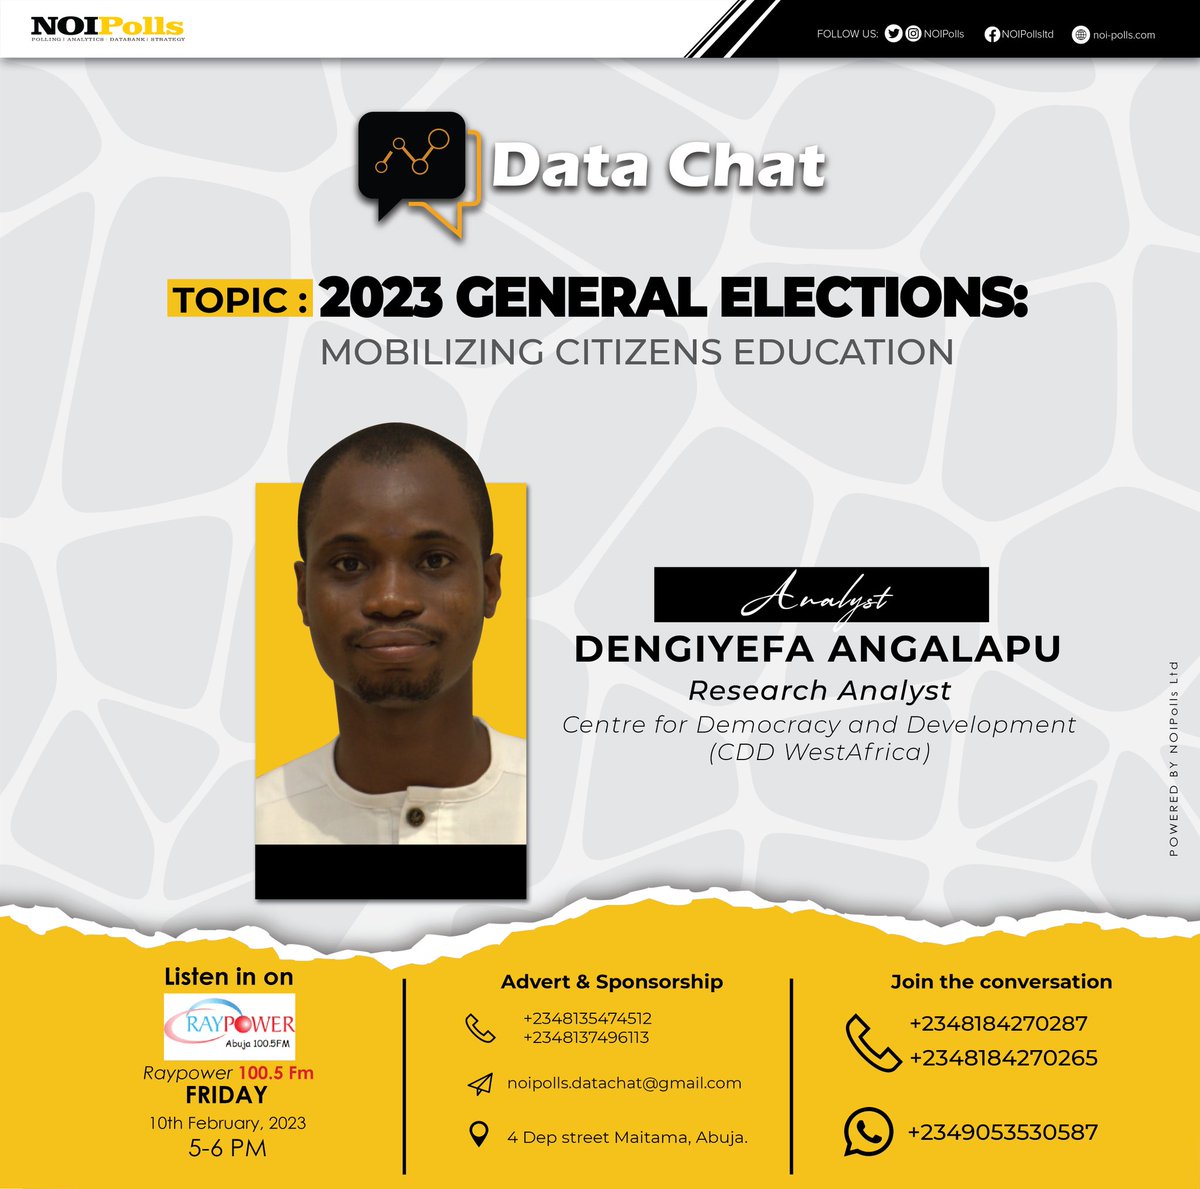 It's today!
Let's have a data chat

#NOIPollsOnDataChat
#NOIPollsVoices
#NigeriaDecides2023 
#CDDEAC